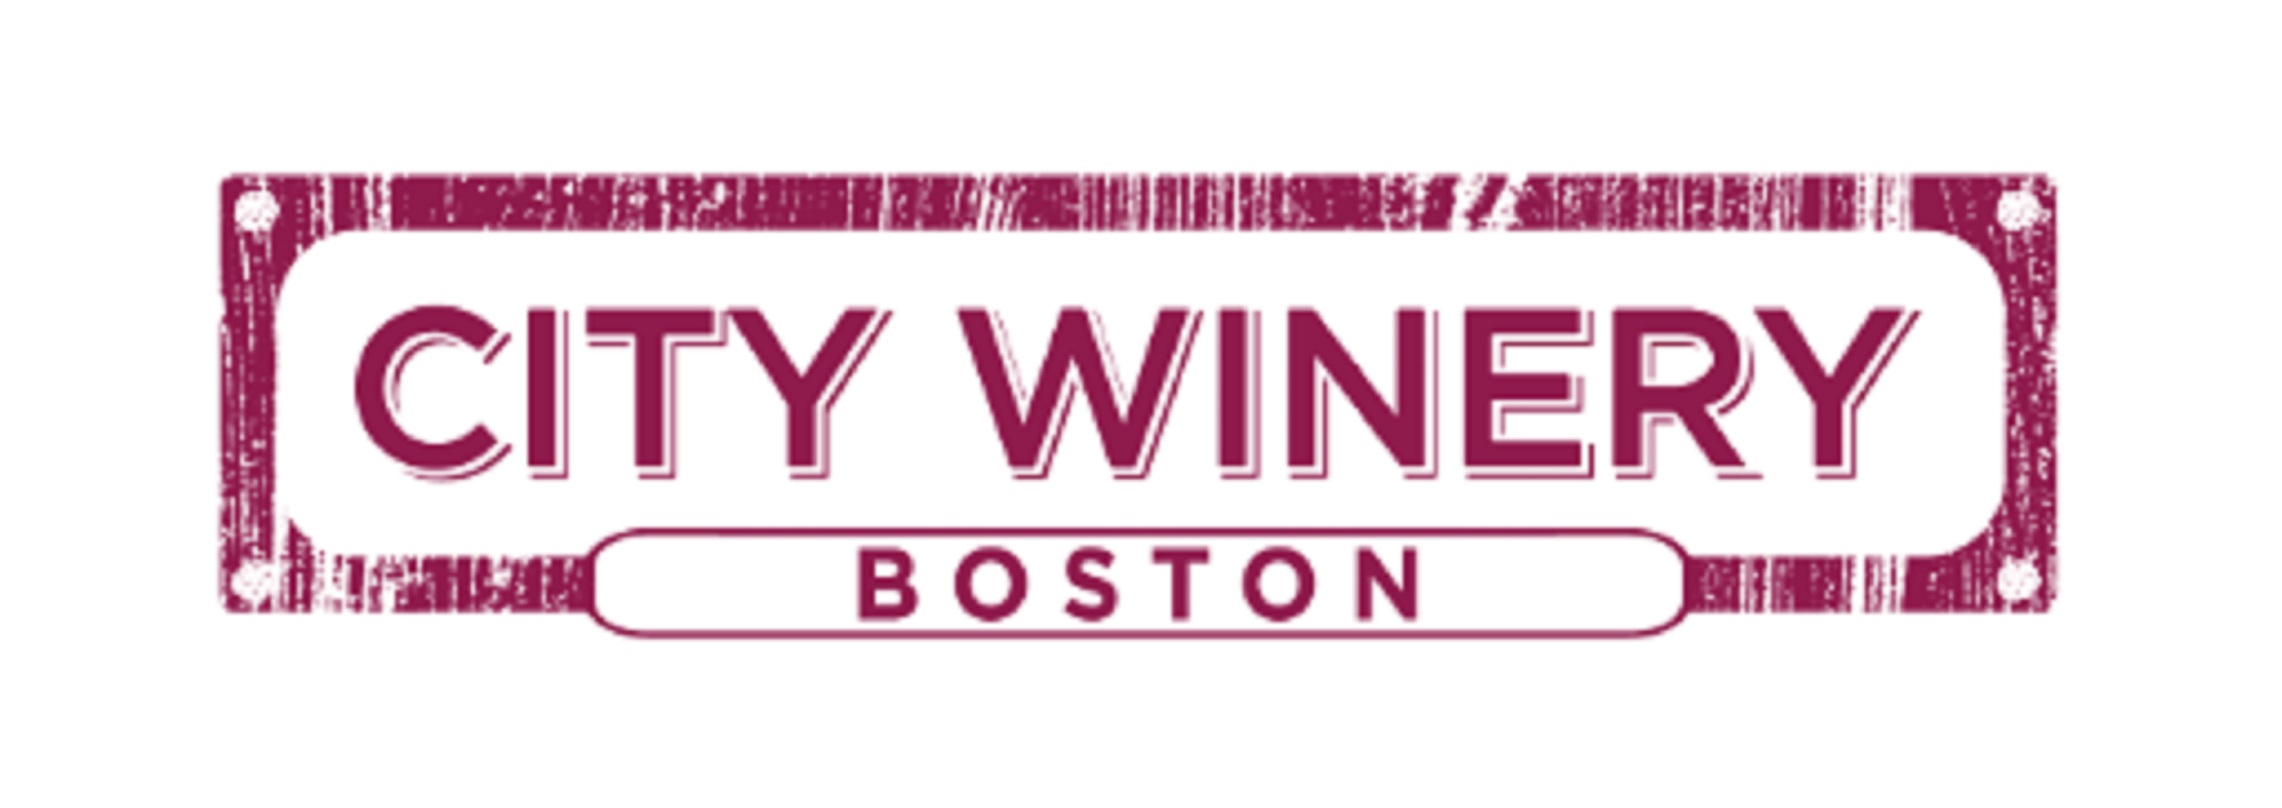 City Winery Boston will be Rockin' All Summer Long with Great Music & Comedy